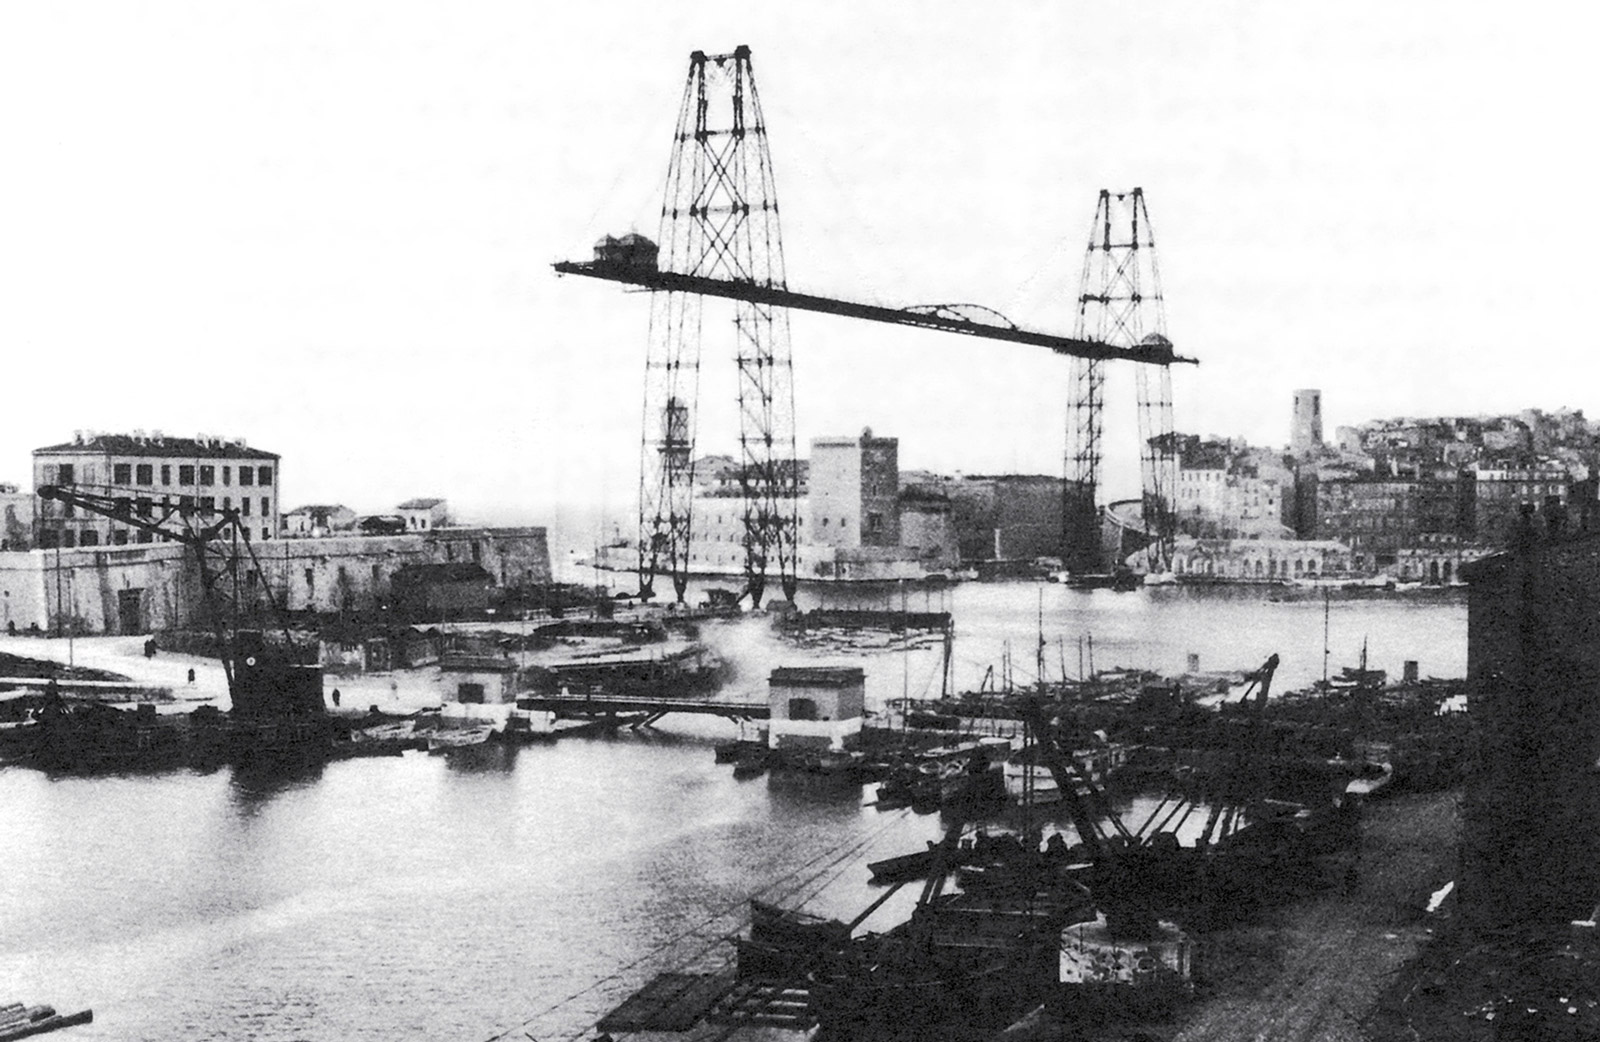 A photograph of the Amodin-designed transporter bridge of Marseilles. The photograph appears in Sigfried Giedion's 1928 book Building in France.